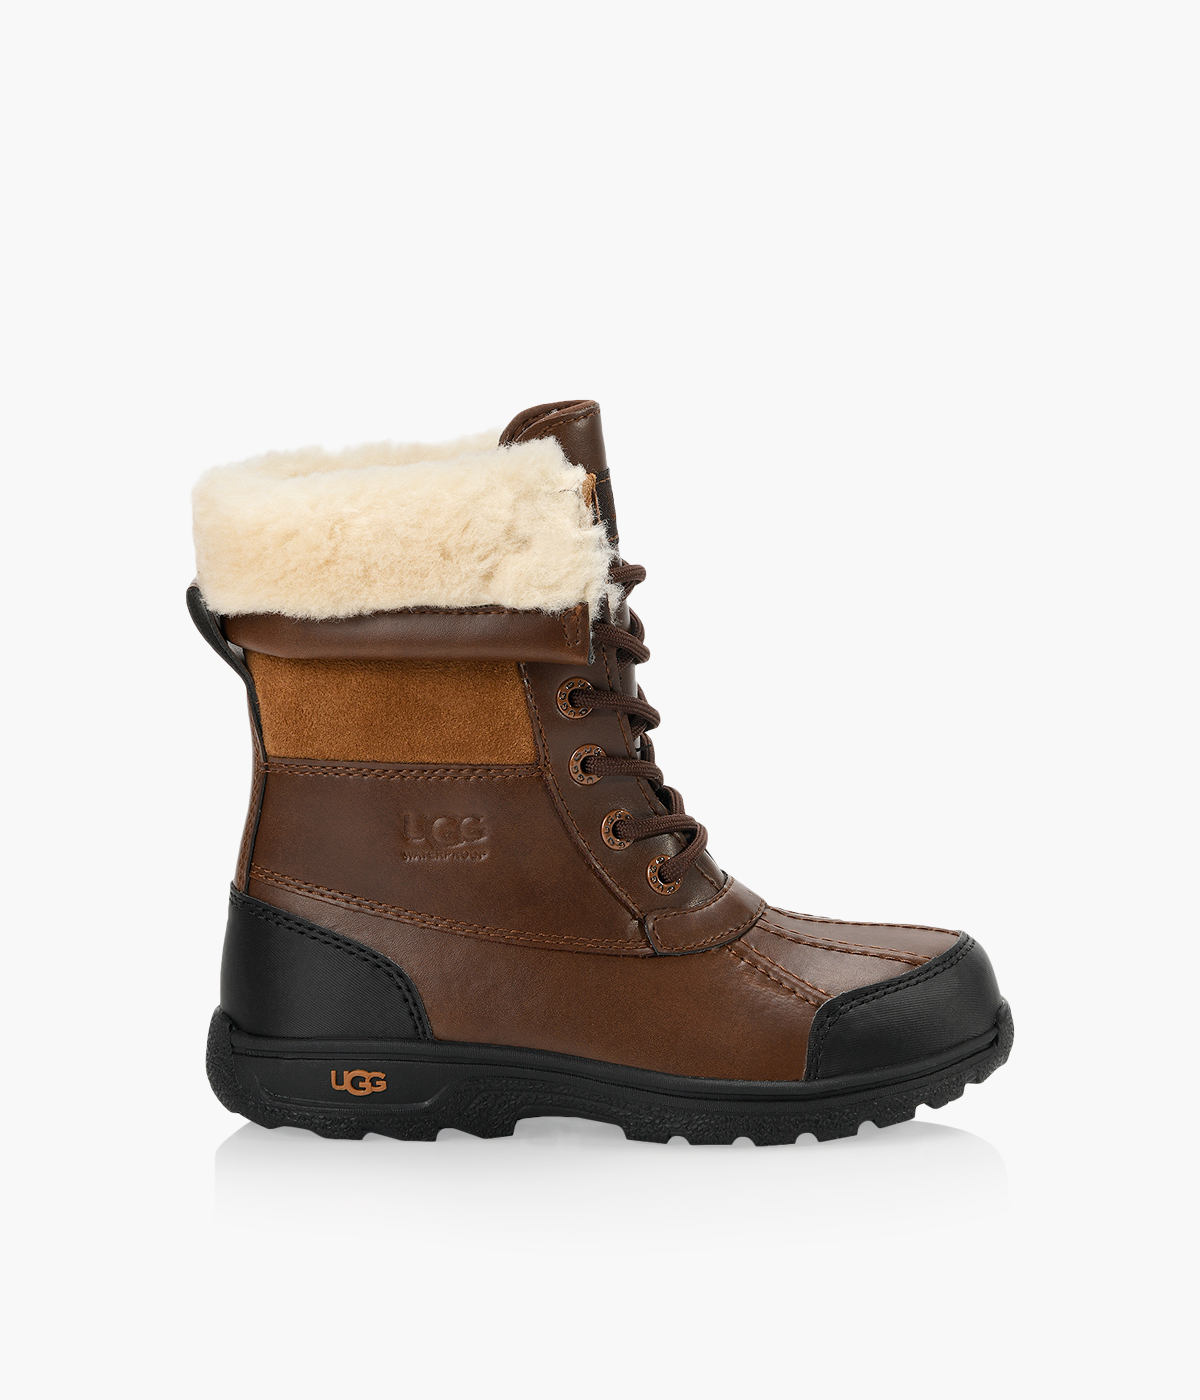 UGG BUTTE II | Browns Shoes